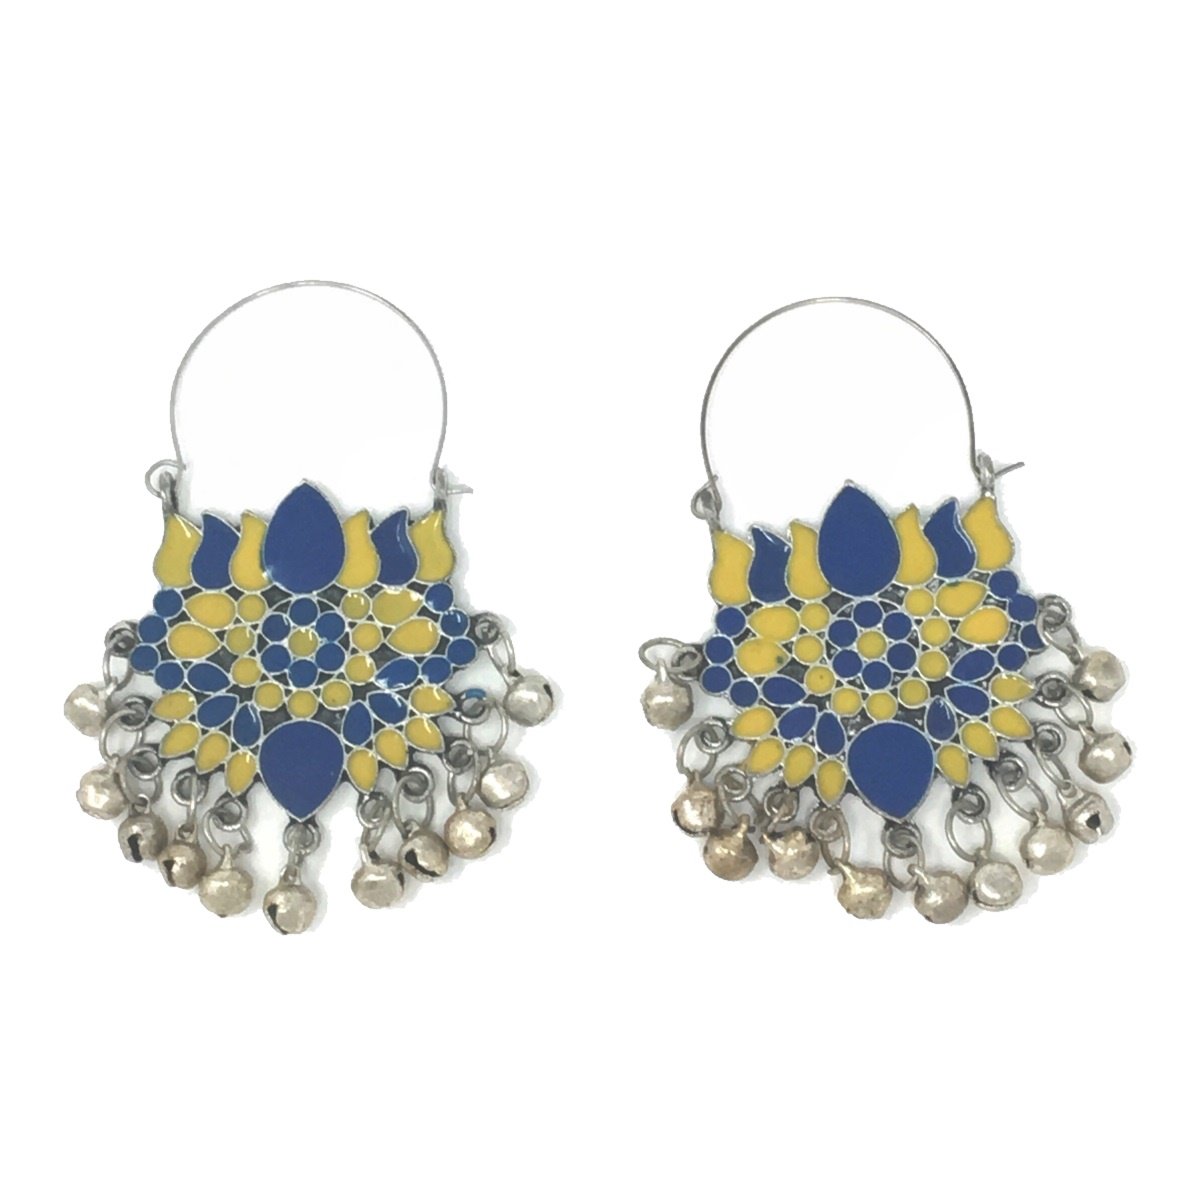 Silver Blue and Yellow Lotus Earrings with Dangling Ghungroos